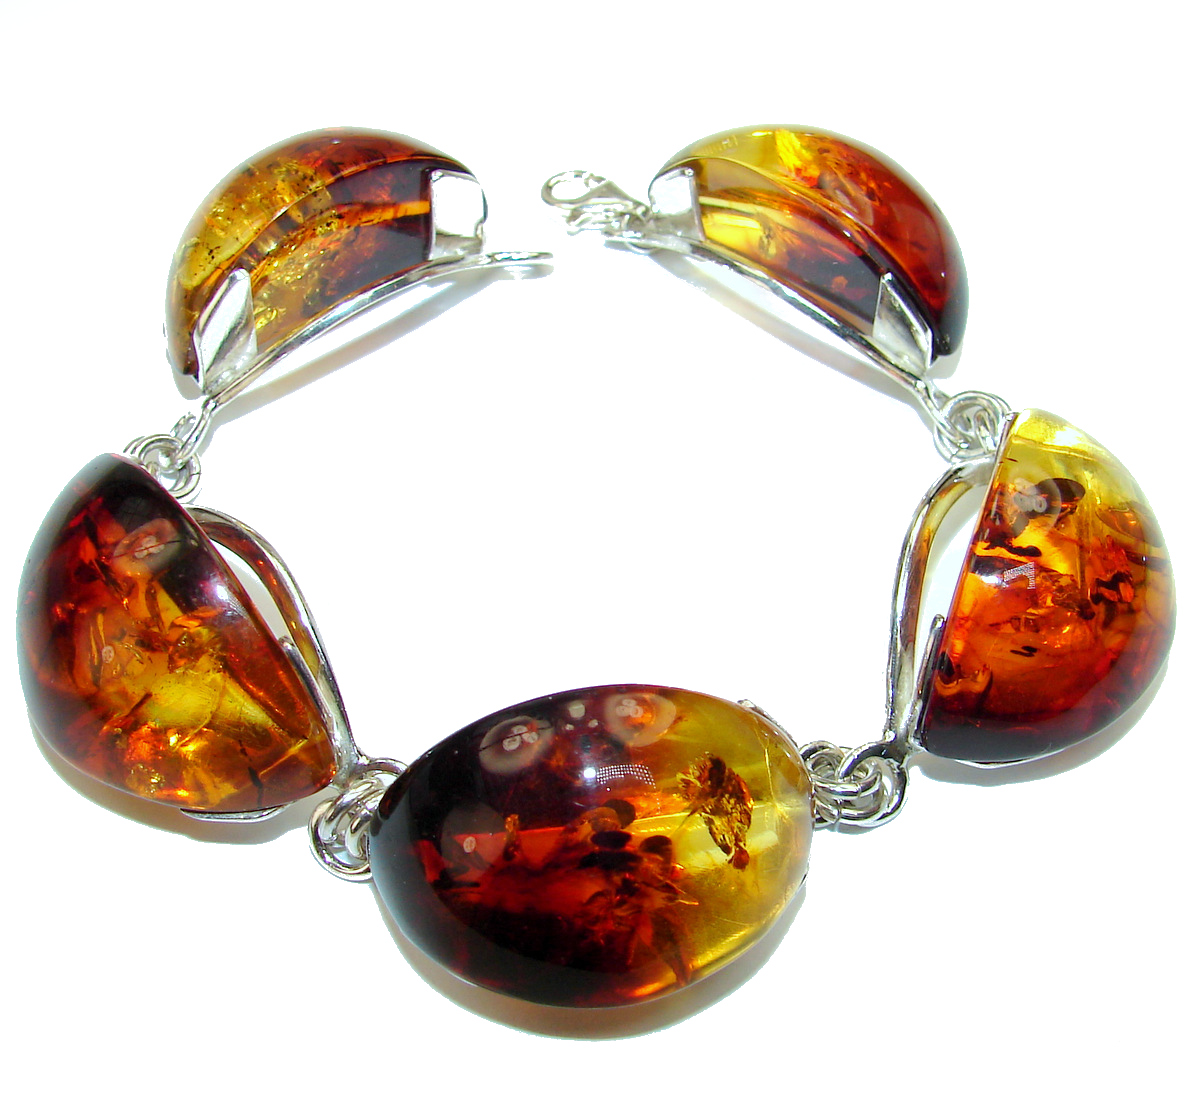 Details about   Genuine Baltic Amber 925 Sterling Silver Bracelet Gift Boxed 